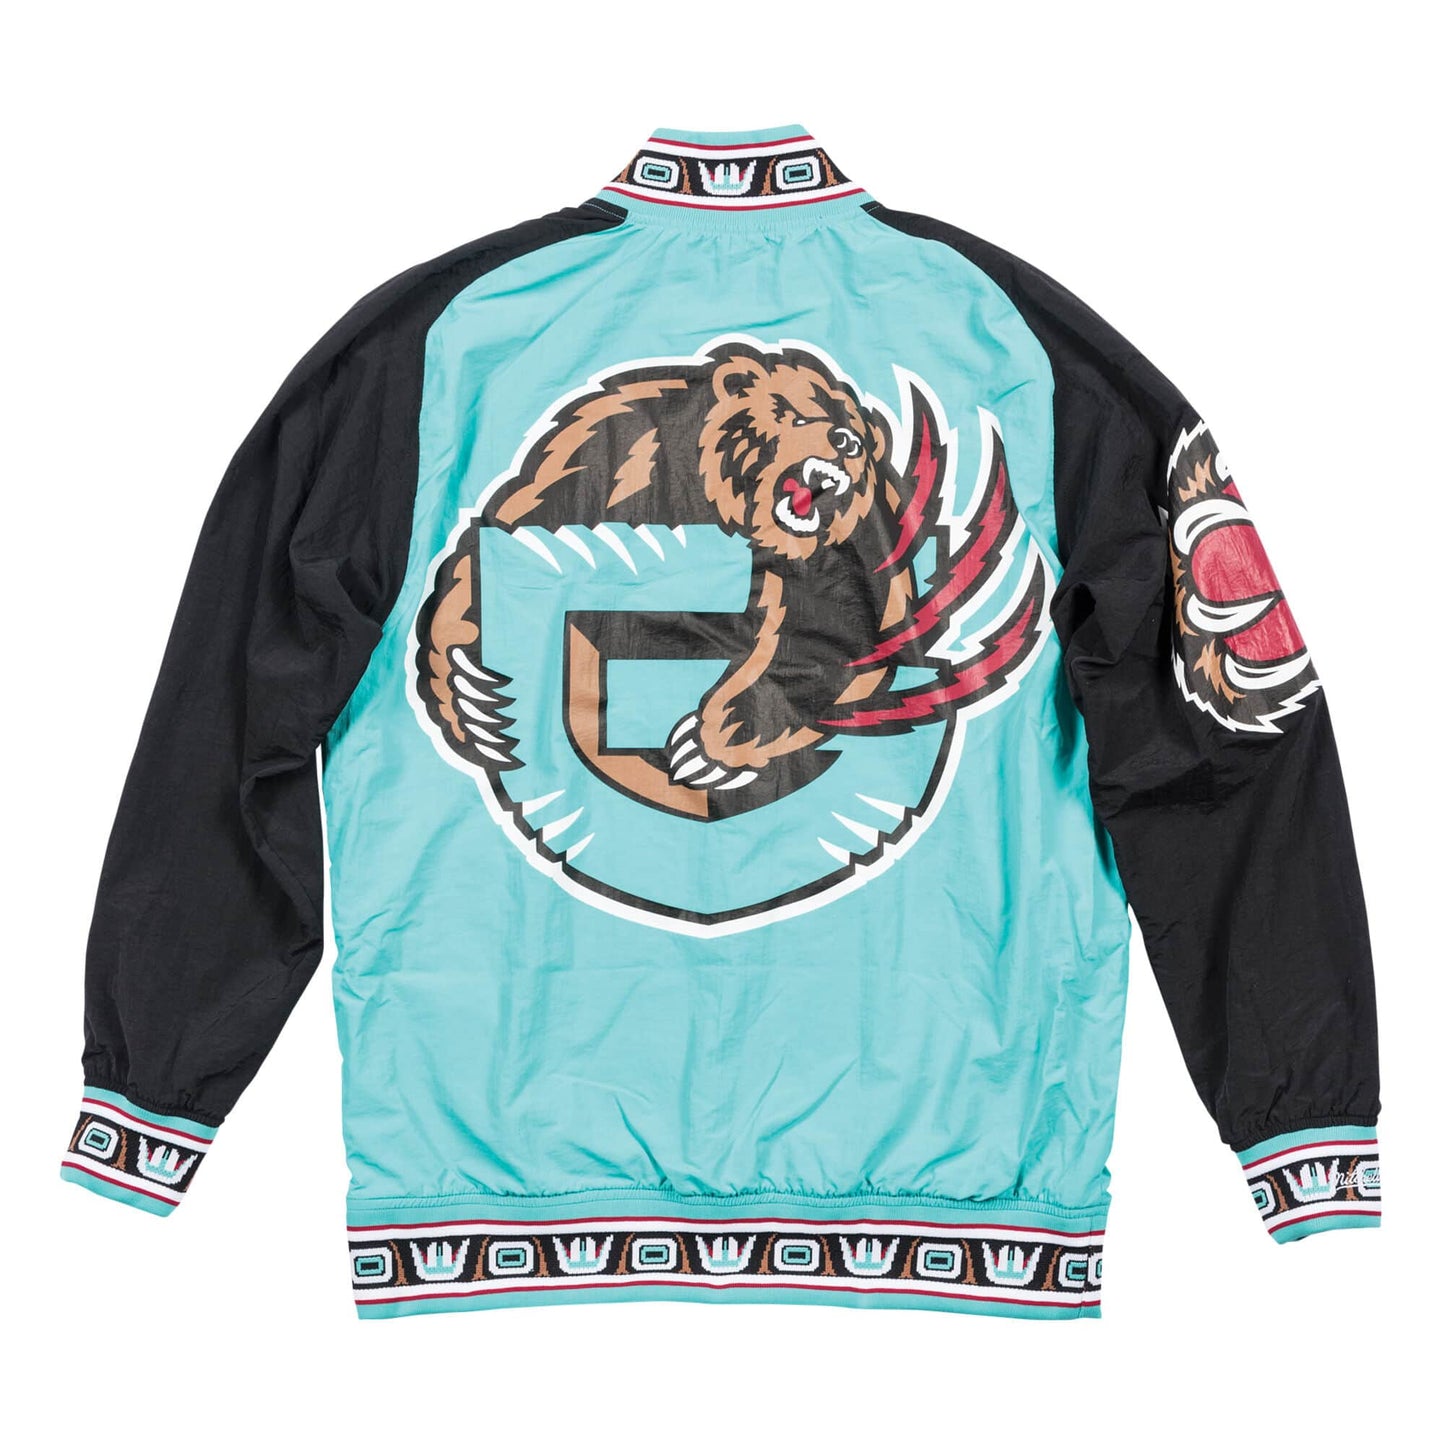 Mitchell & Ness 1995-96 Vancouver Grizzlies Authentic Warm Up Jacket